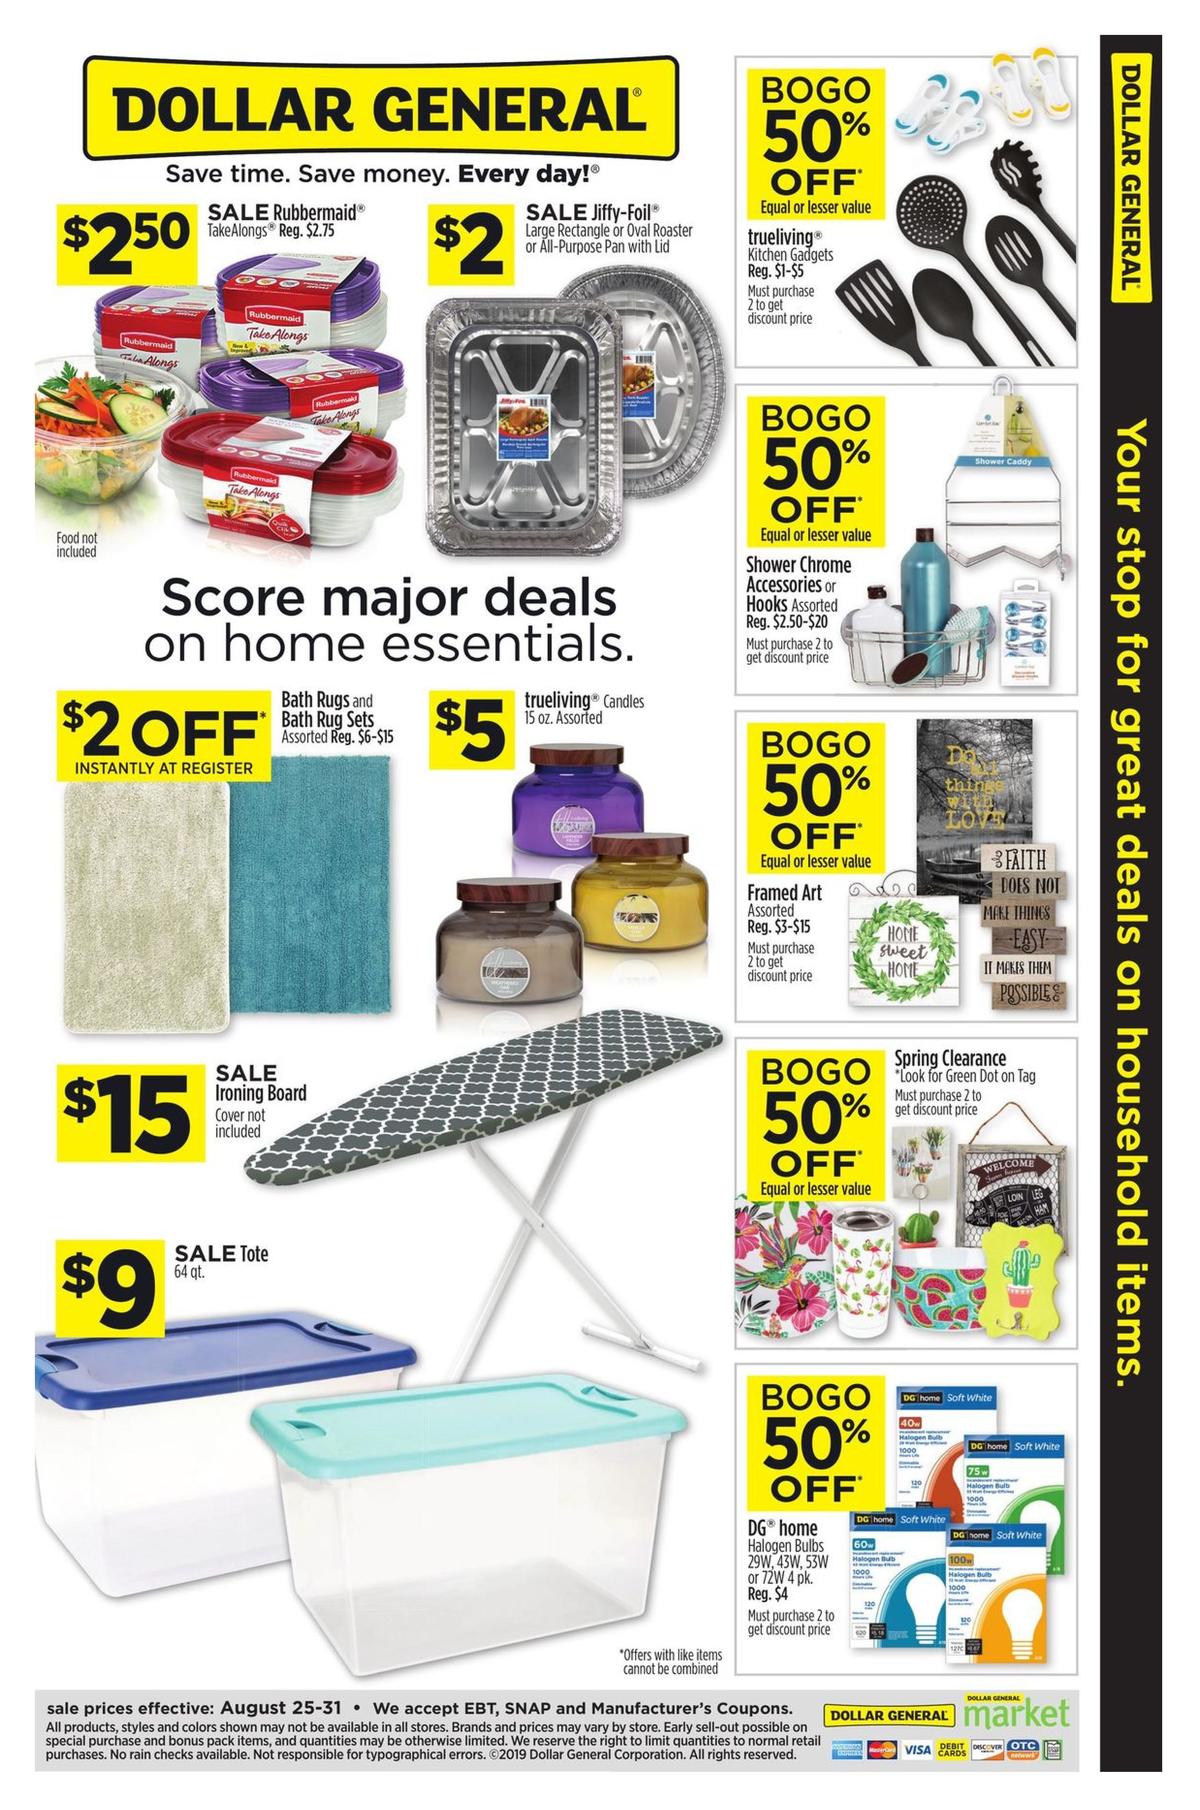 Dollar General Score Major Deals on Home Essentials Weekly Ad from August 25